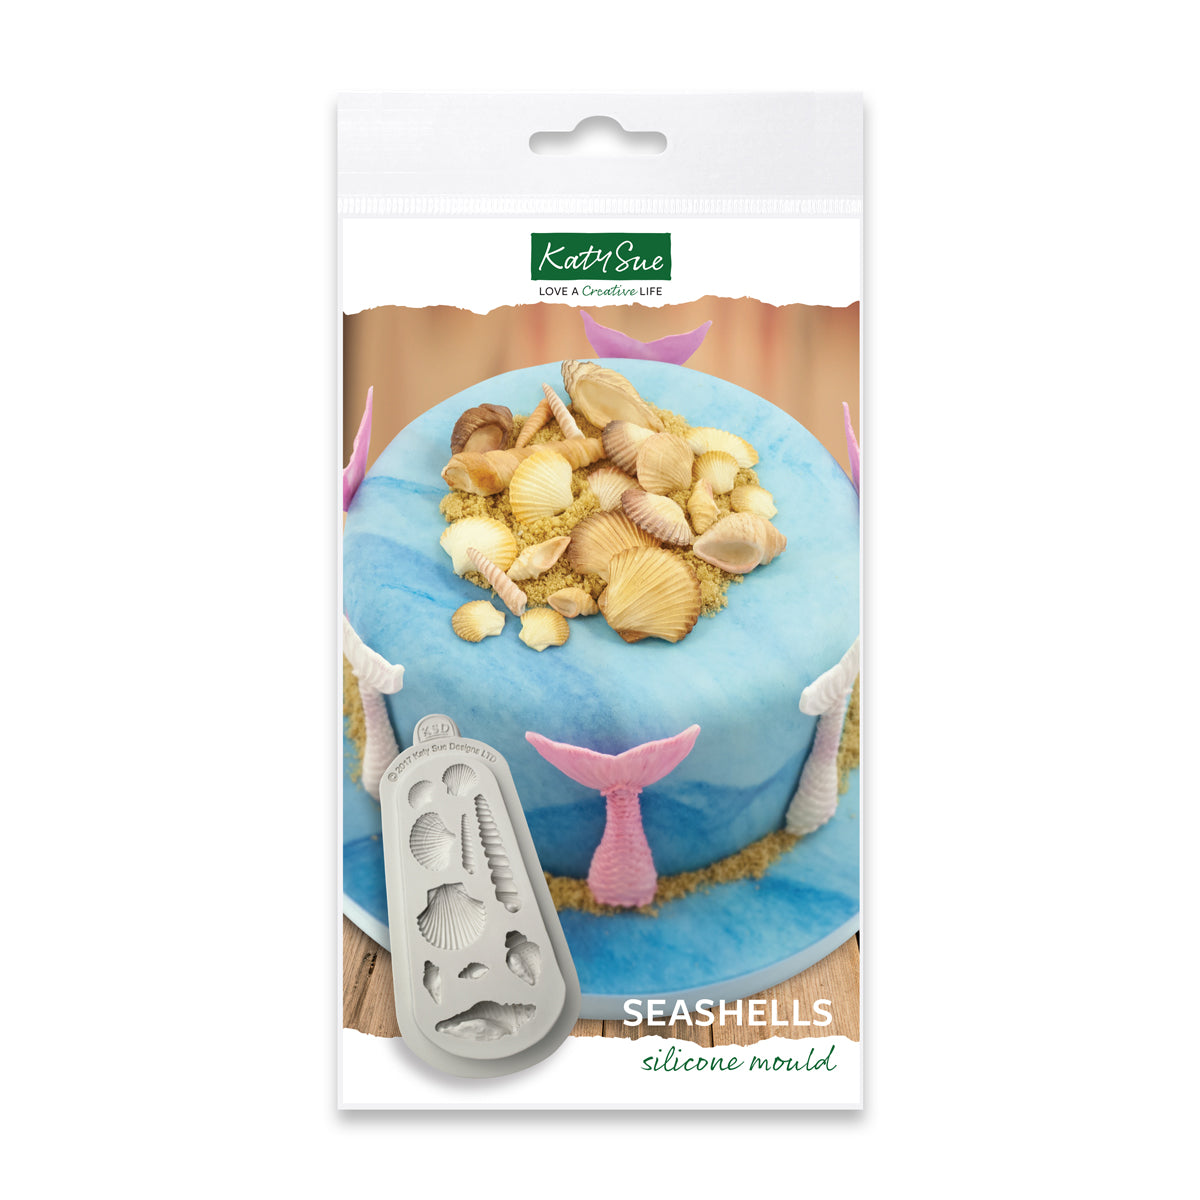 Katy Sue Melting Marshmallows Silicone Mold for Cake Decorating & Craft - Mold Size 80 x 143 x 23mm or 3 x 5.6 x 1 Inches